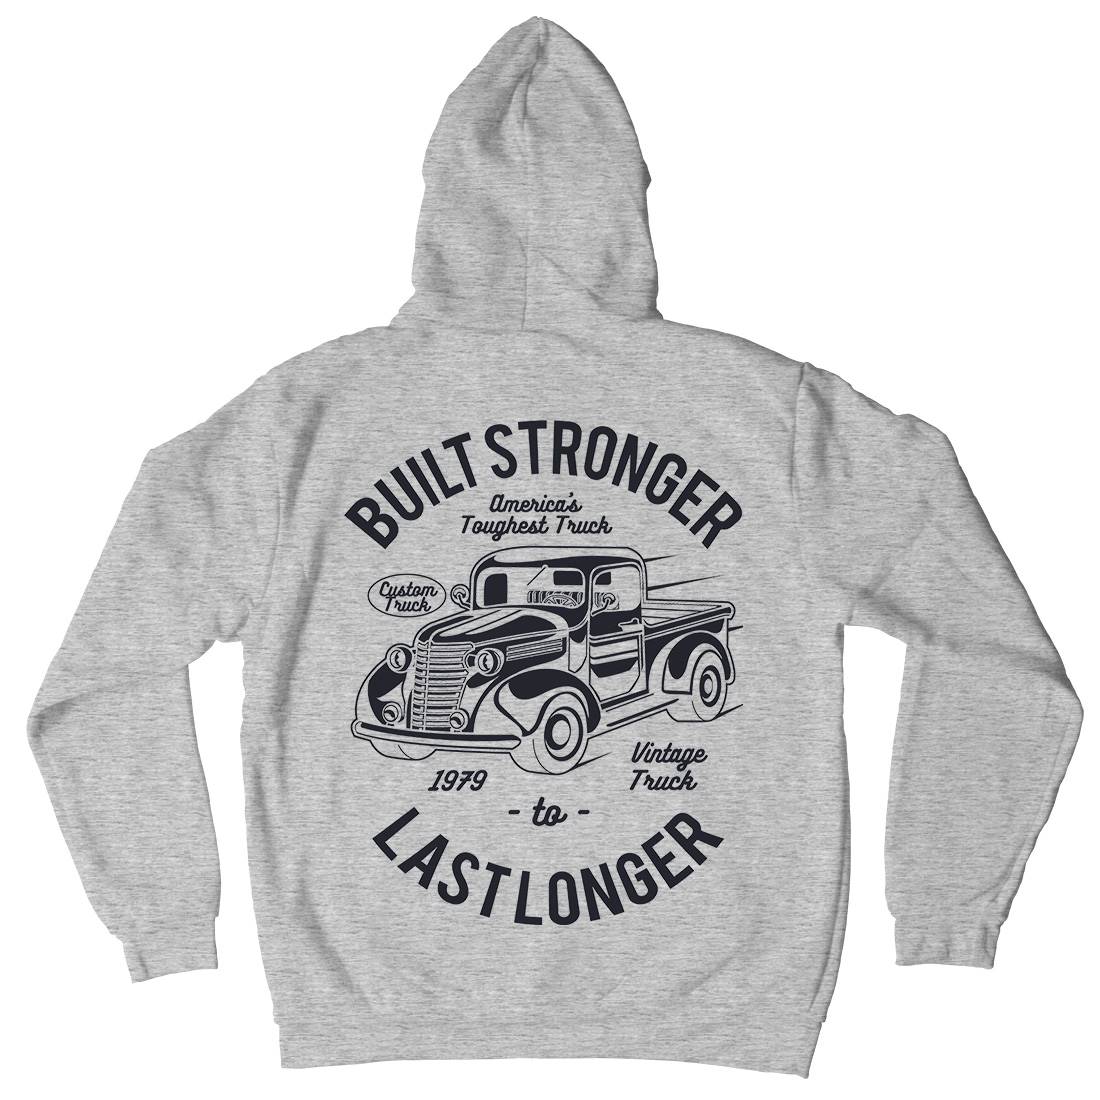 Built Stronger Mens Hoodie With Pocket Cars A023